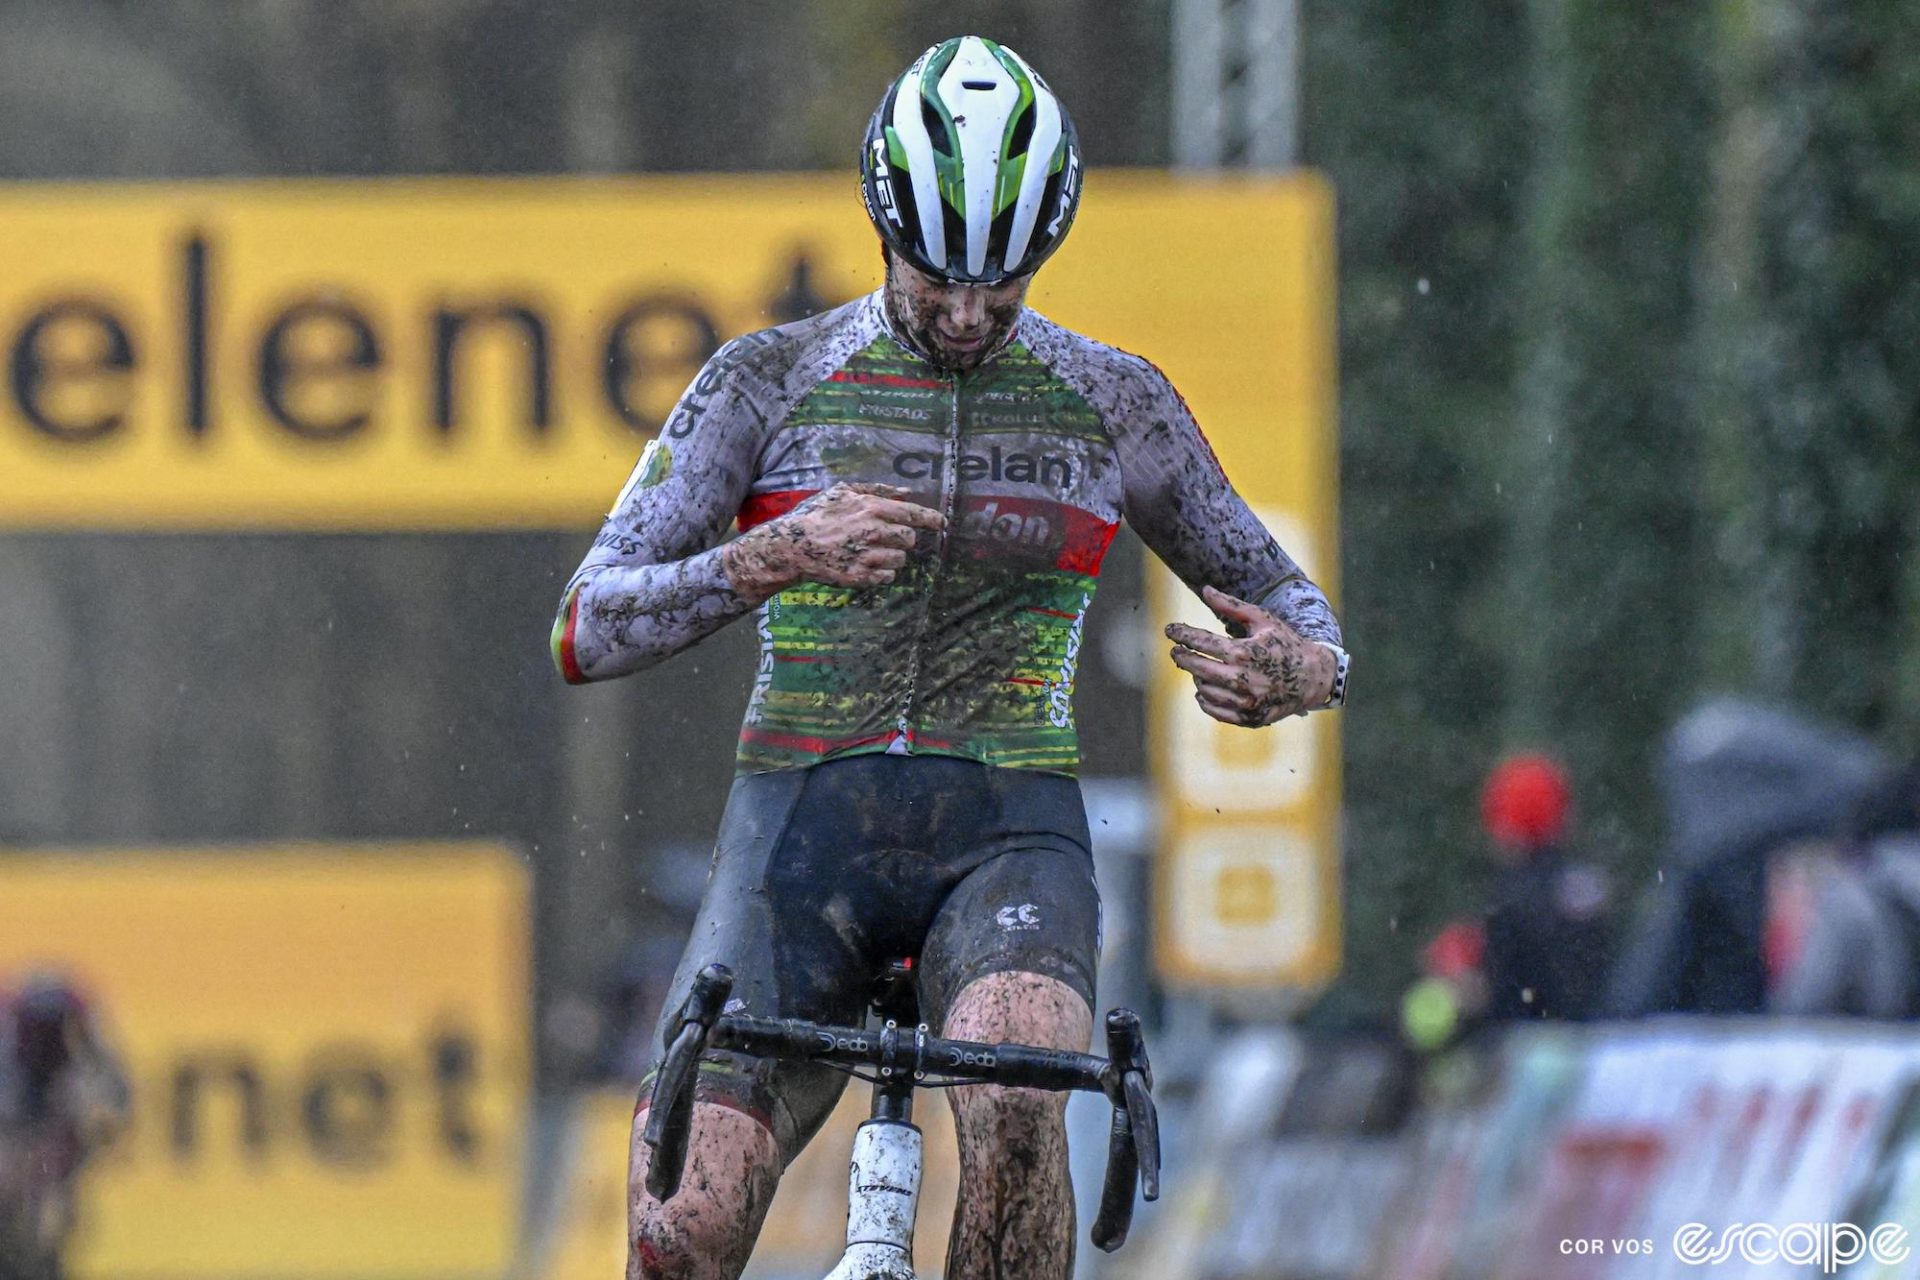 Marion Norbert Riberolle cleans mud off her jersey to point to the Crelan-Corendon logo as she crosses the line for third place.